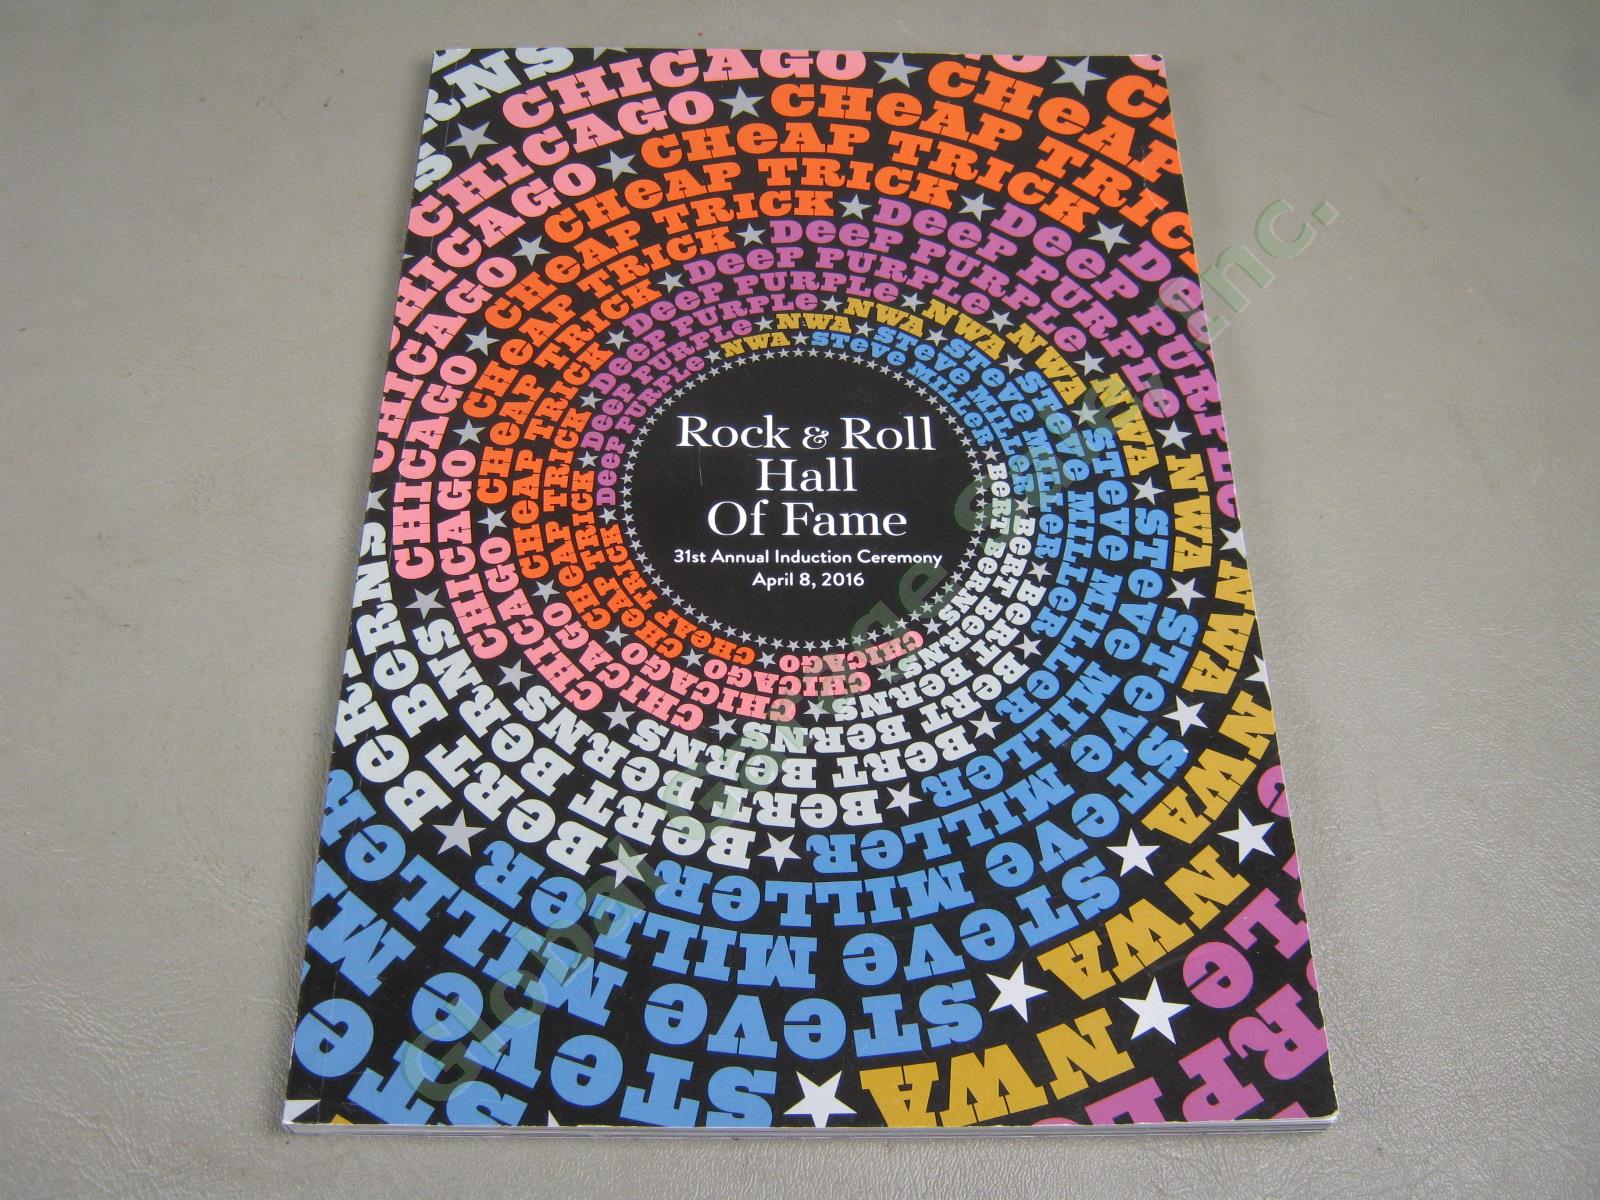 2016 Rock & Roll Hall Of Fame 31st Annual Induction Ceremony Program + Sealed CD 3